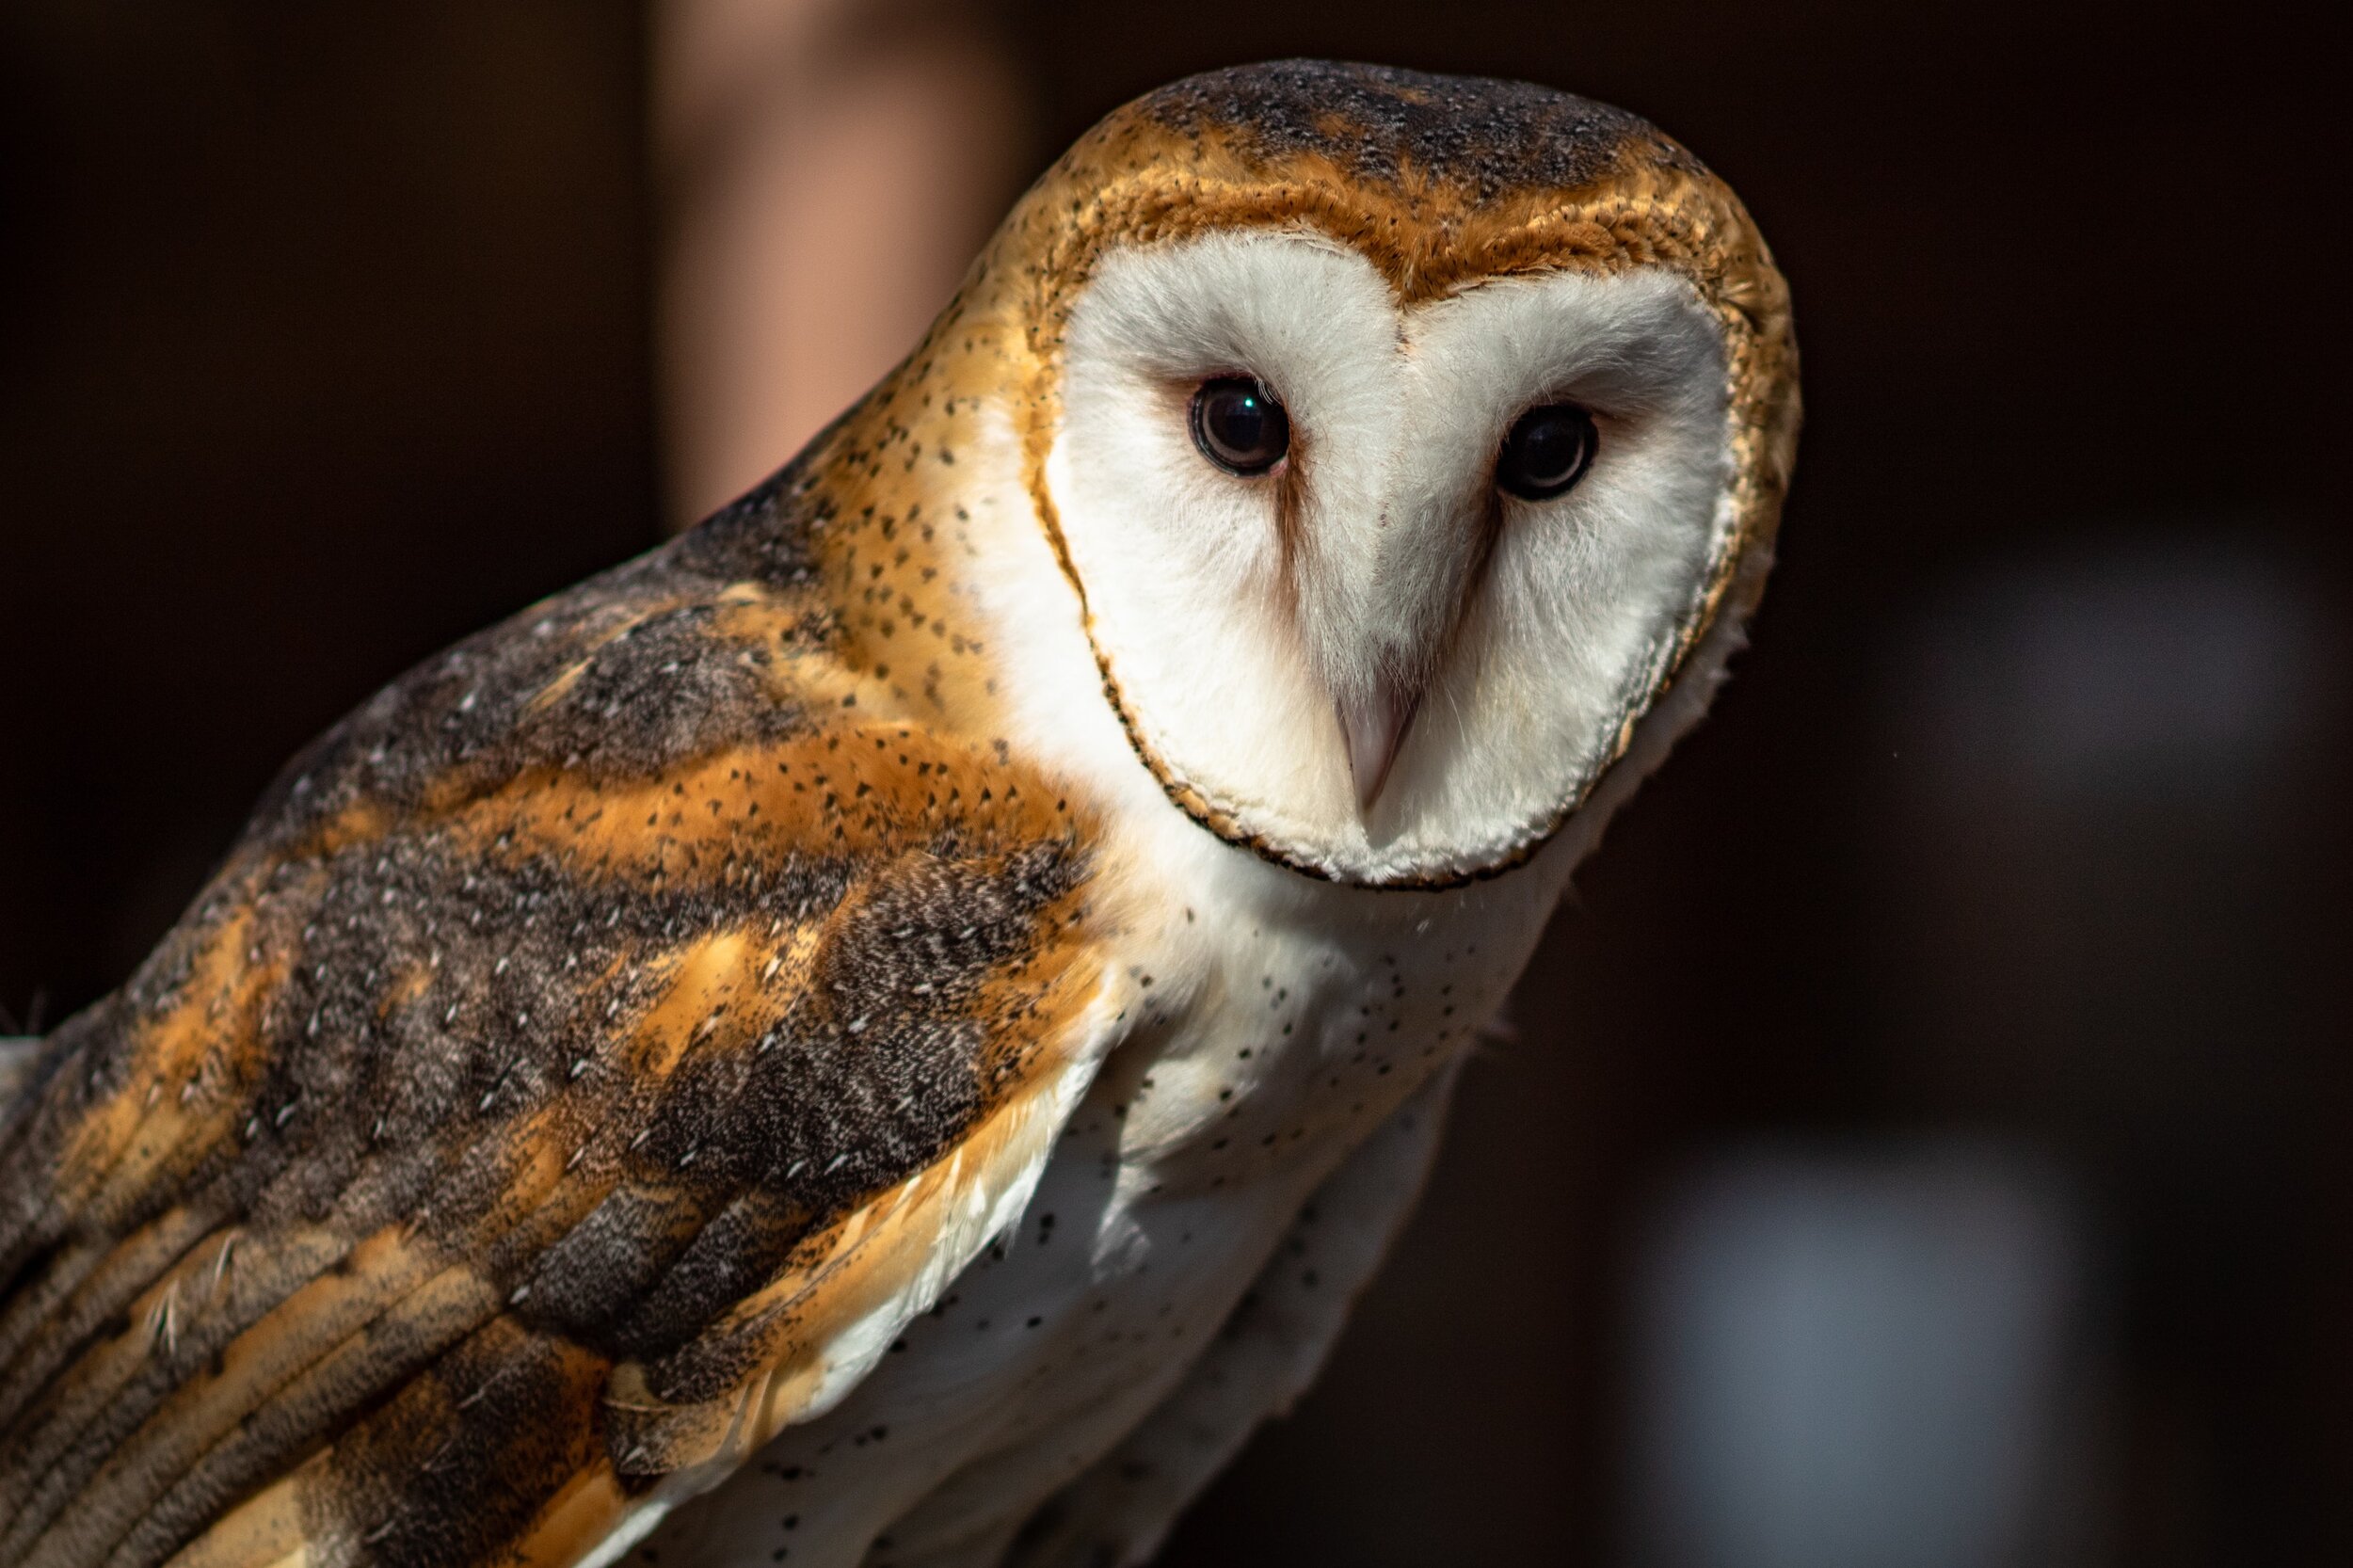 Barn Owls have a cappuccino coloration.